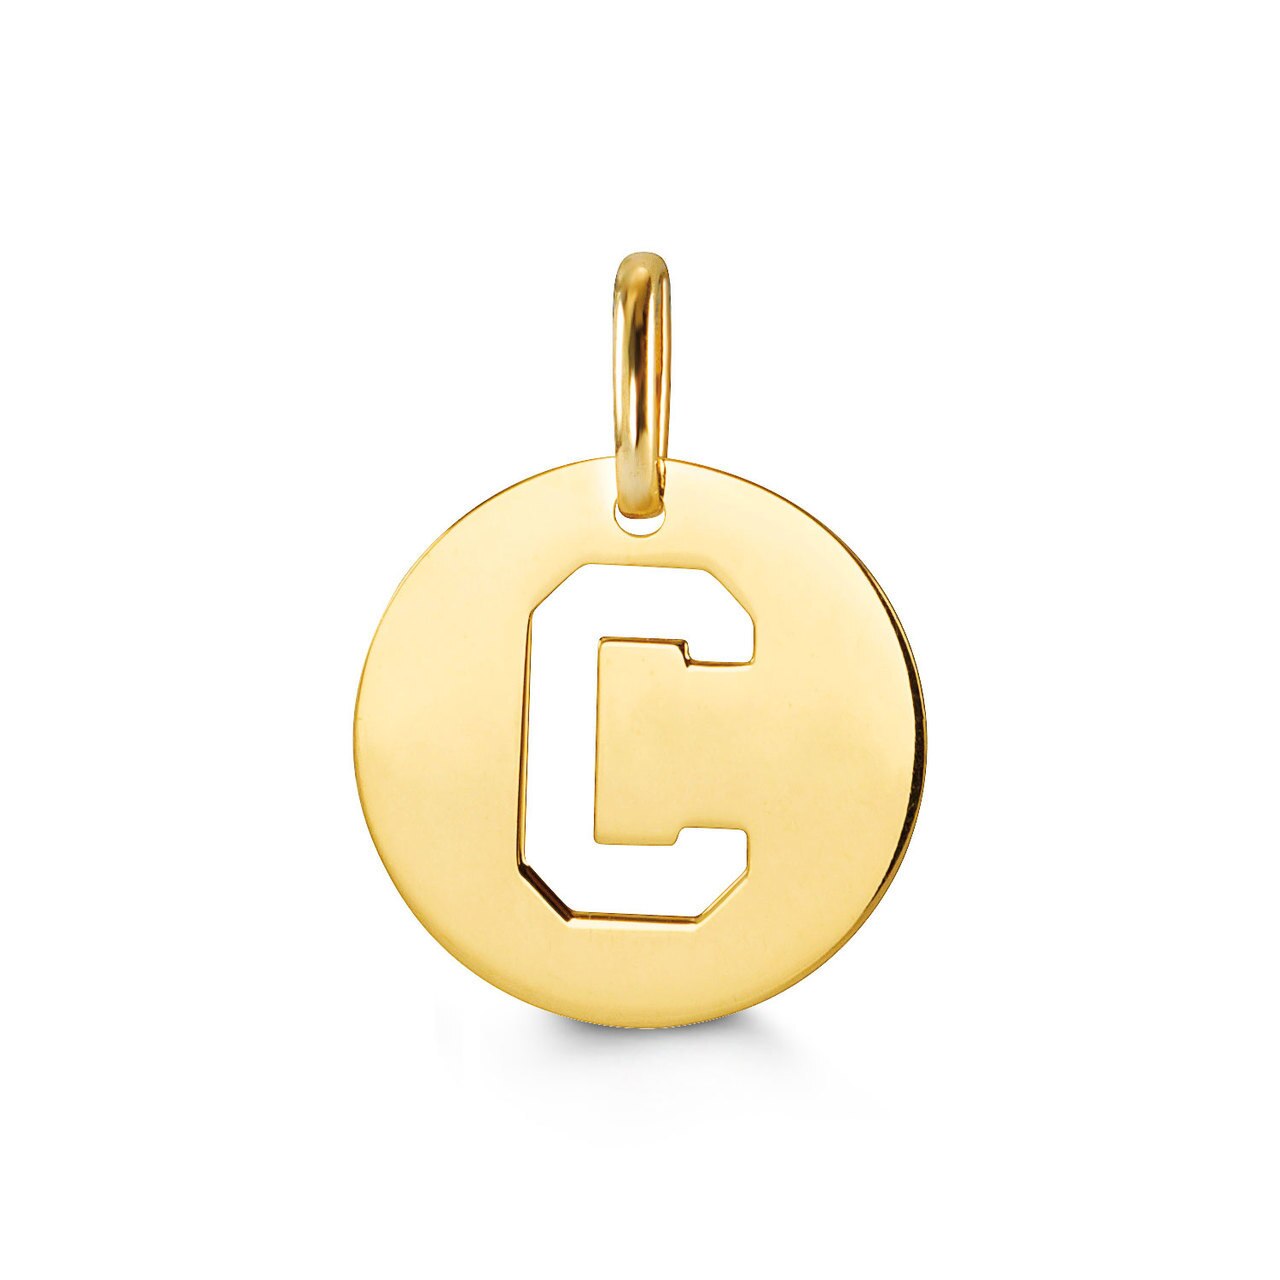 Letter "C" Pendant in Yellow Gold